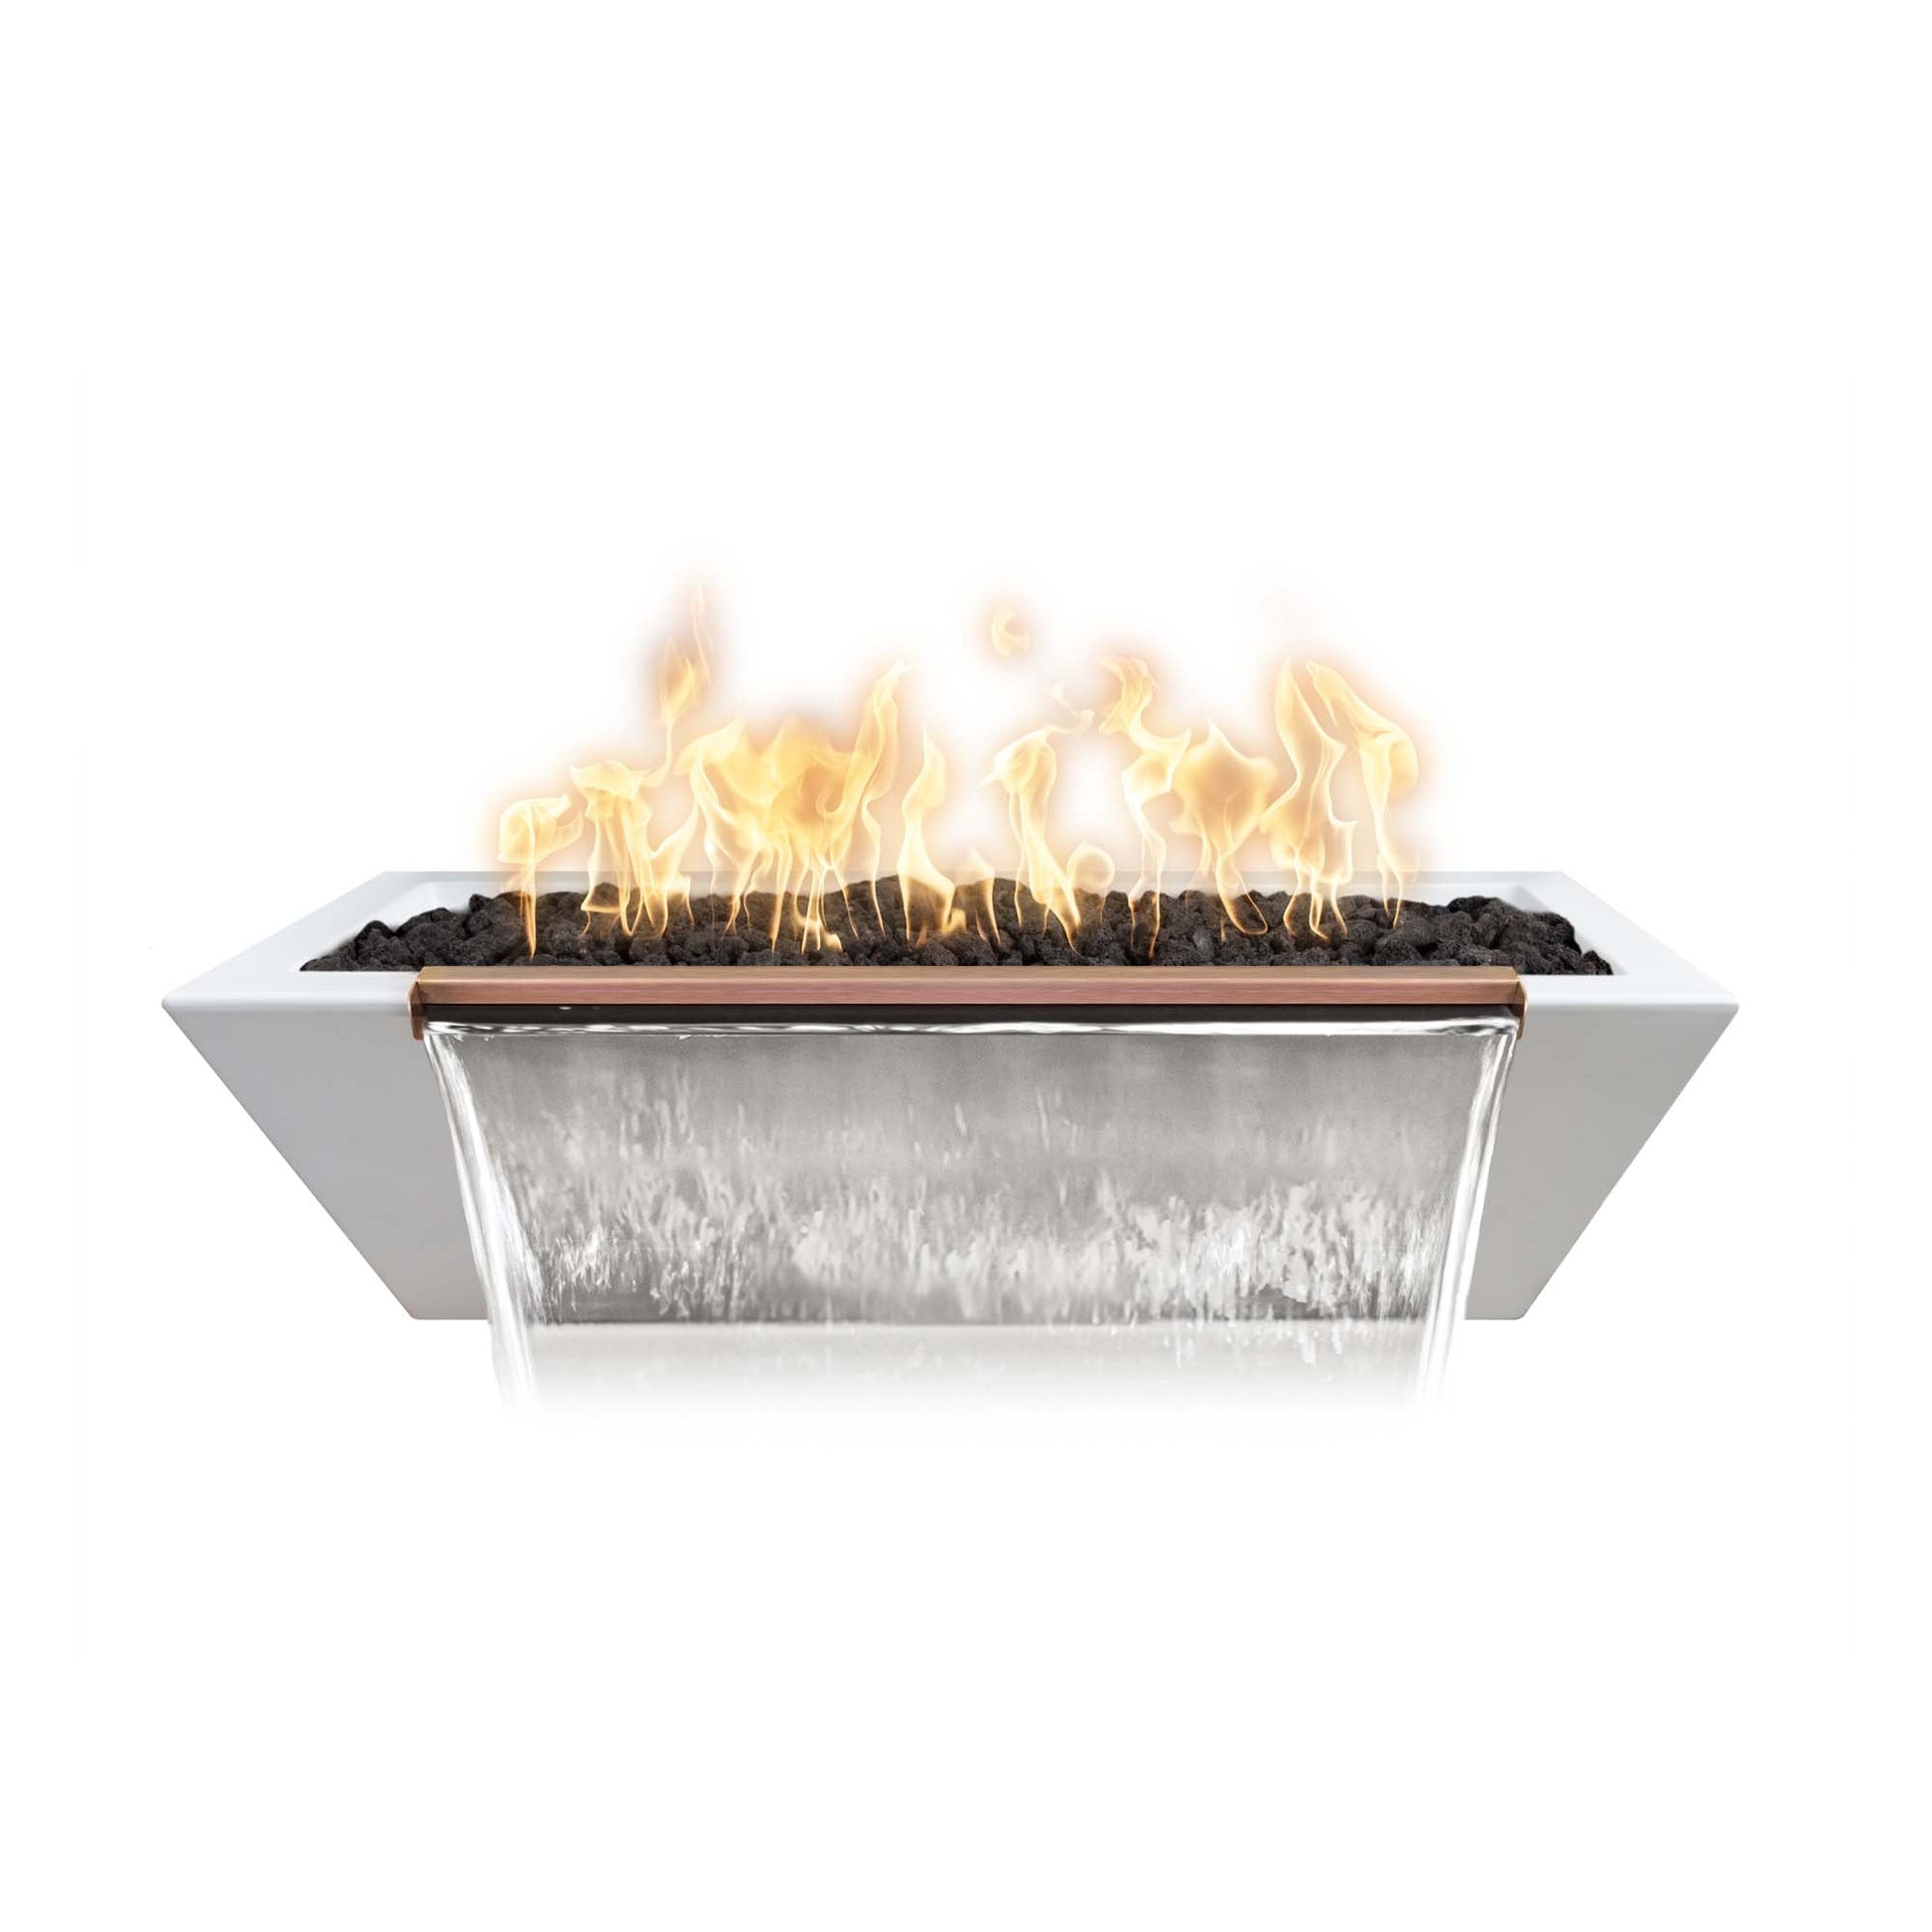 The Outdoor Plus Linear Maya 60" Metallic Copper GFRC Concrete Liquid Propane Fire & Water Bowl with 12V Electronic Ignition